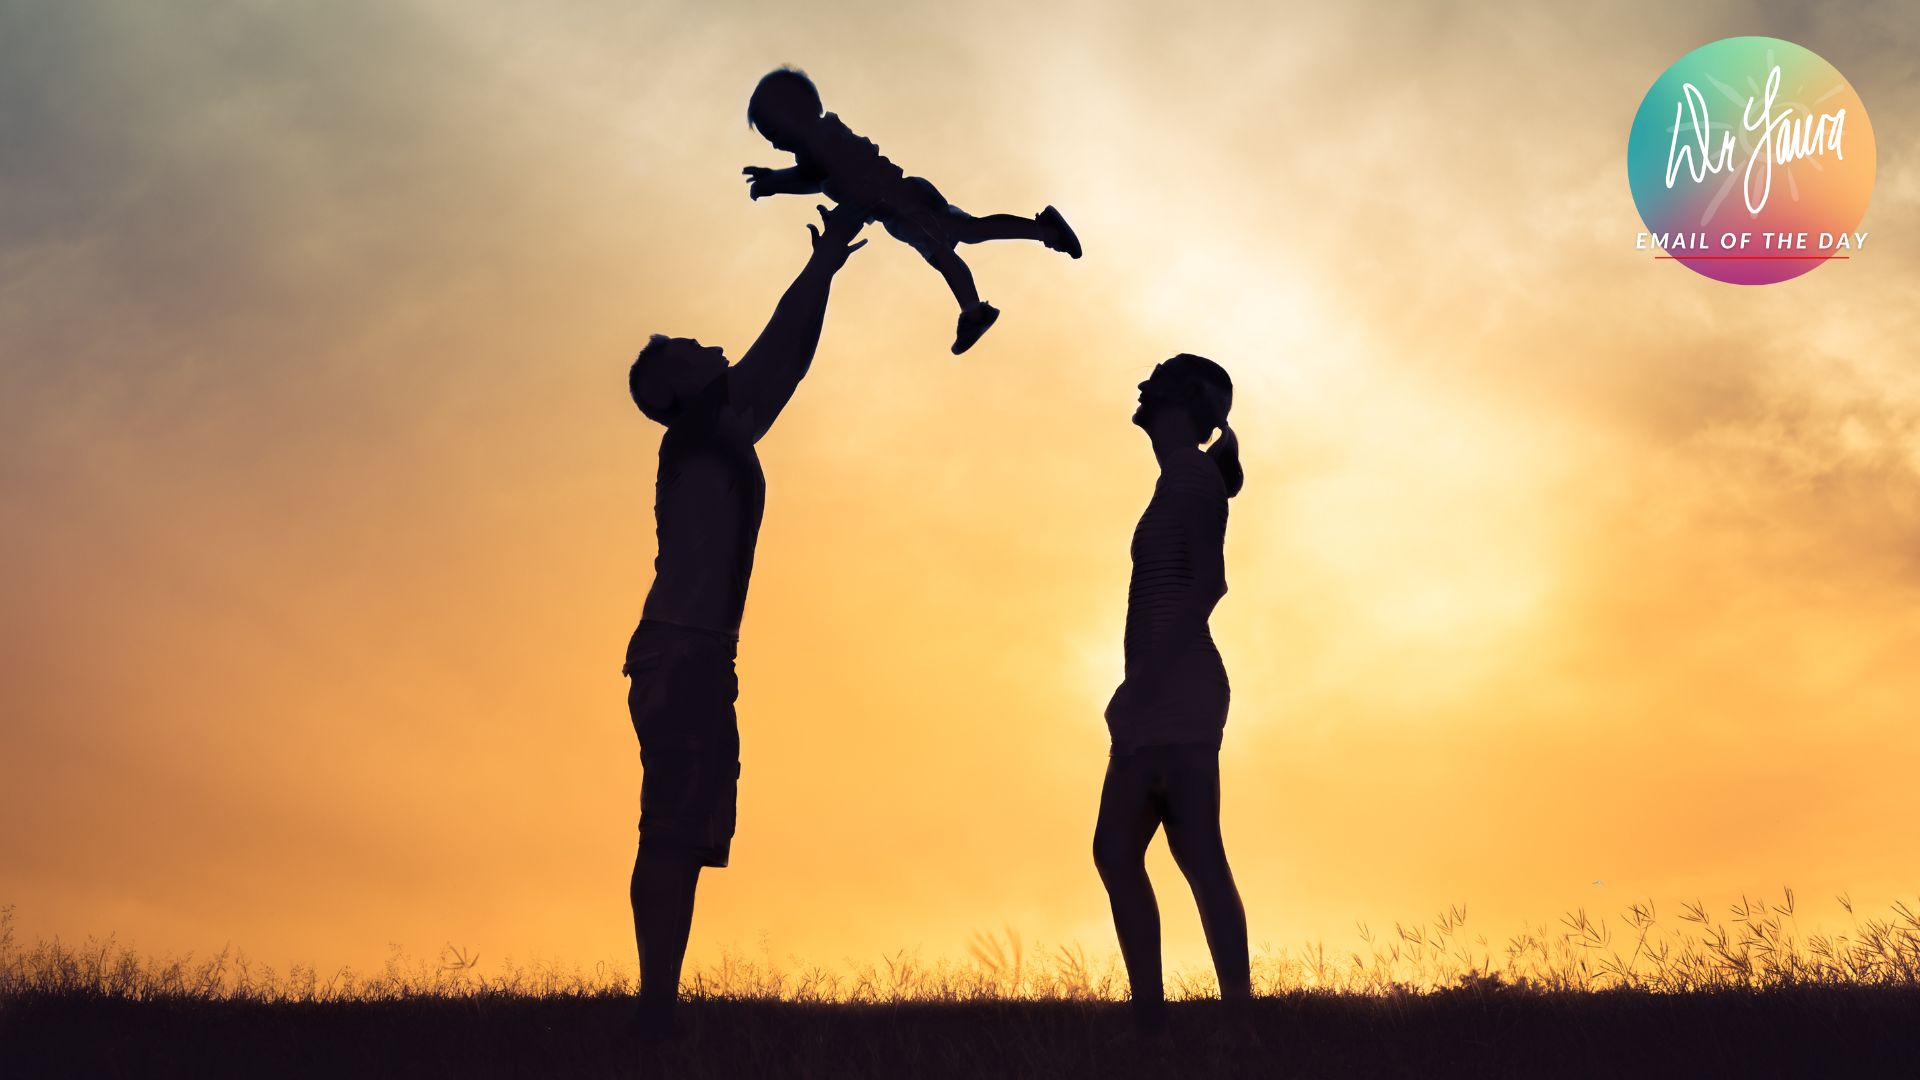 Silhouette of man tossing child into the air while female silhouette looks at them